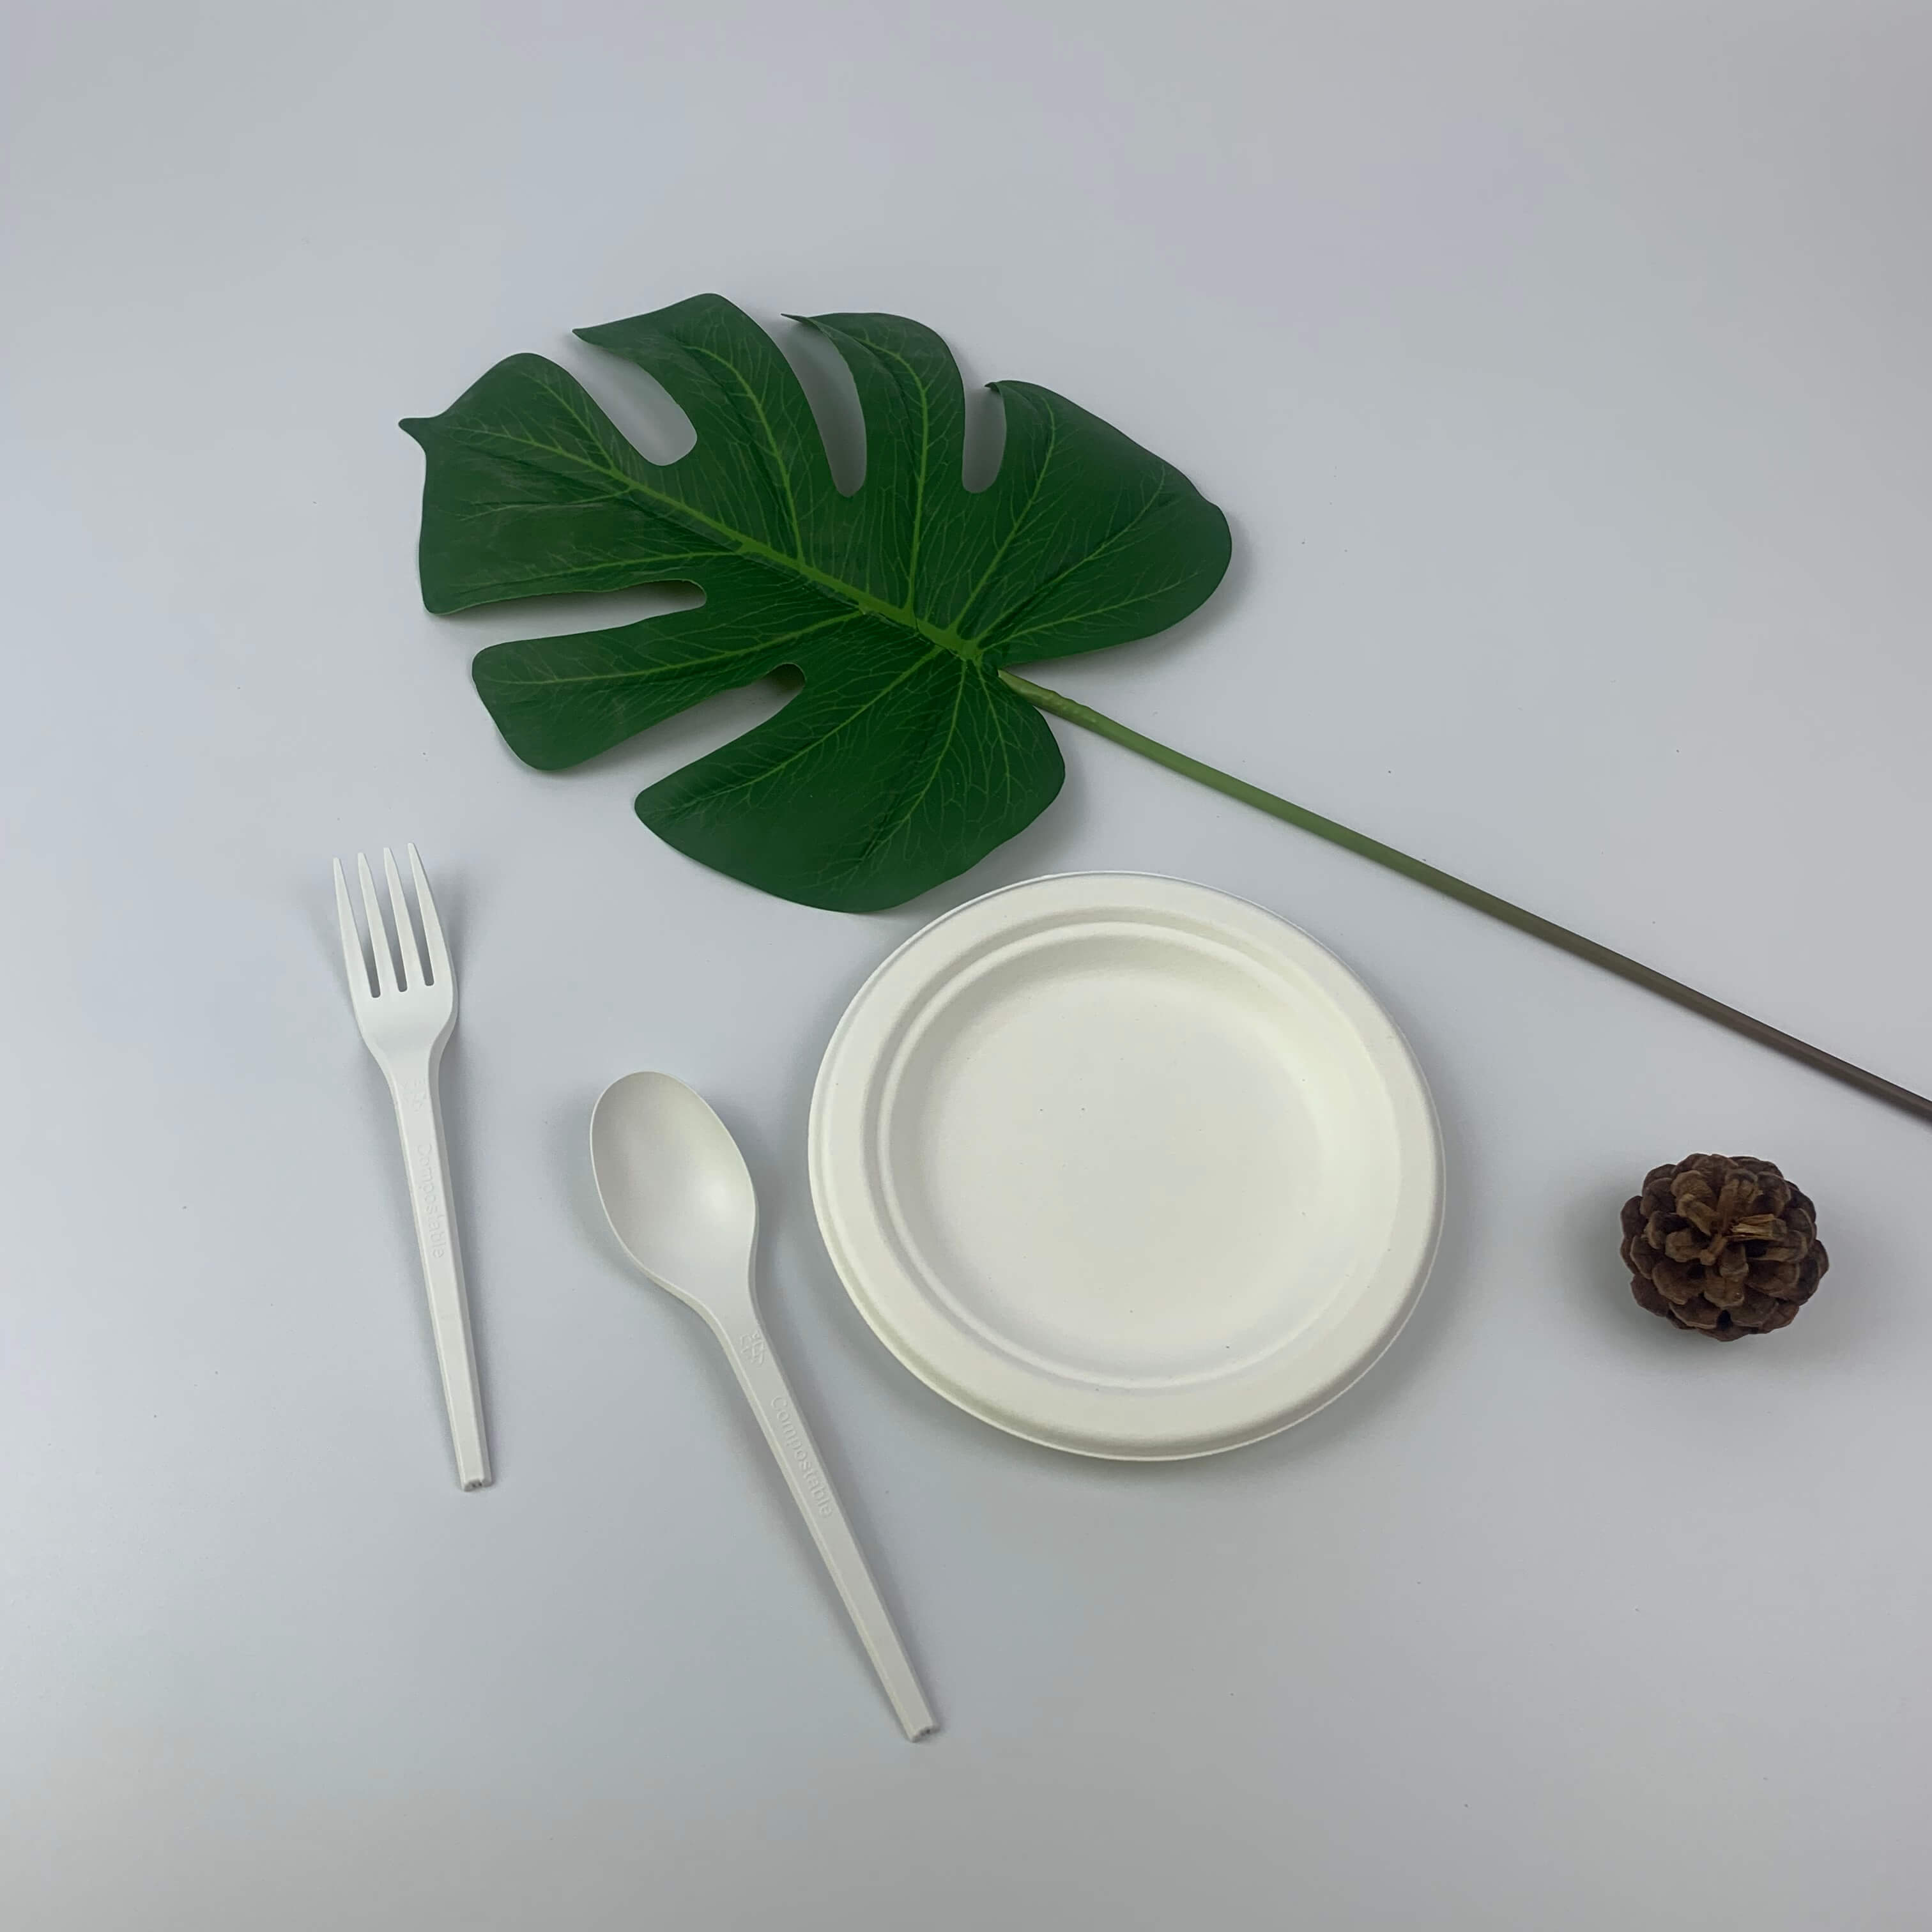 Bagasse is used as an environmentally friendly material